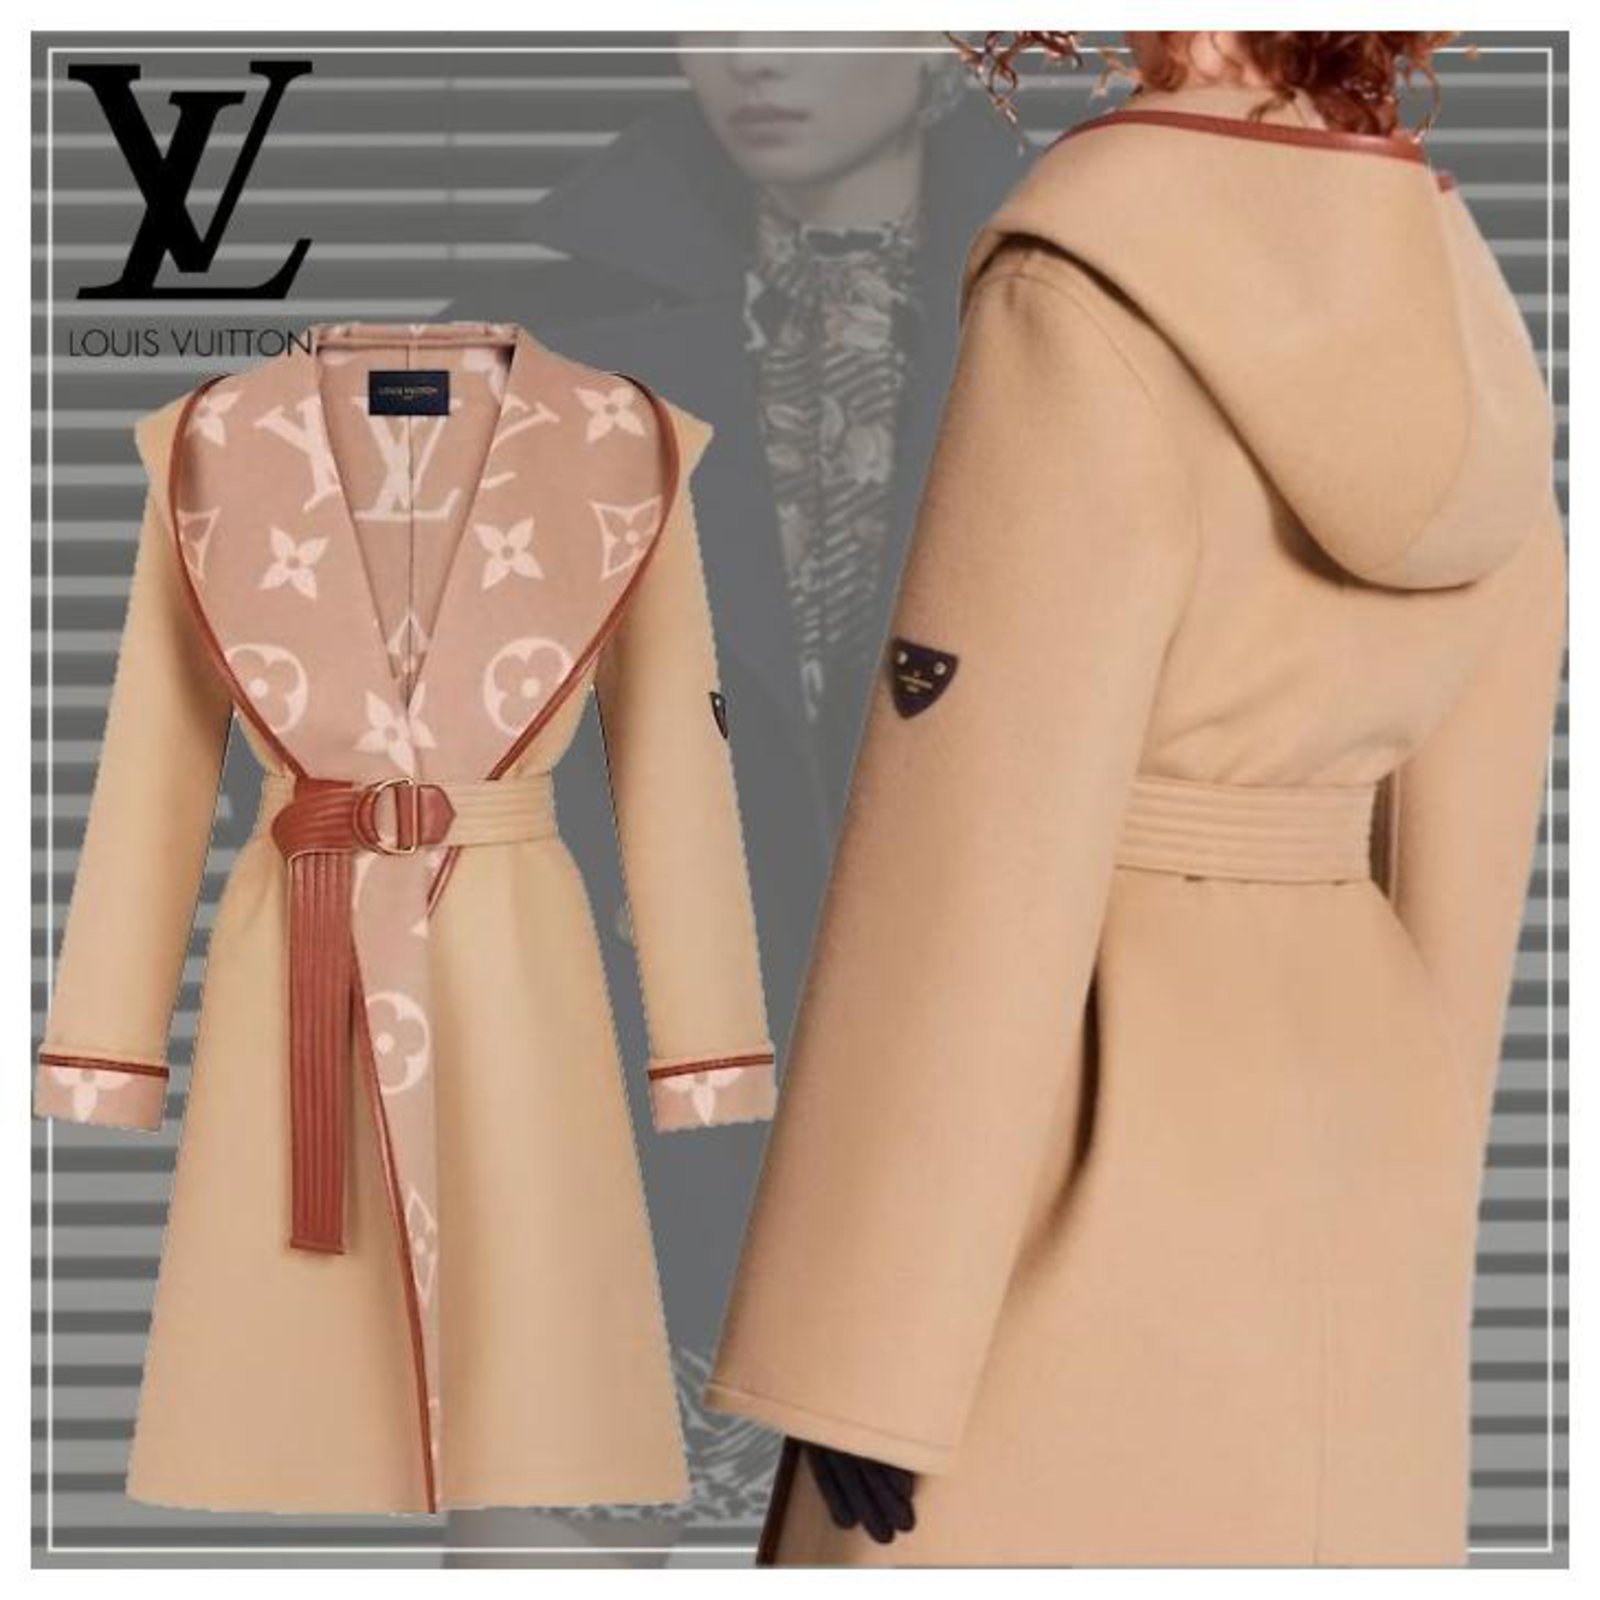 Louis Vuitton Hooded Wrap Coat Size 36 (US 4) New With Tags